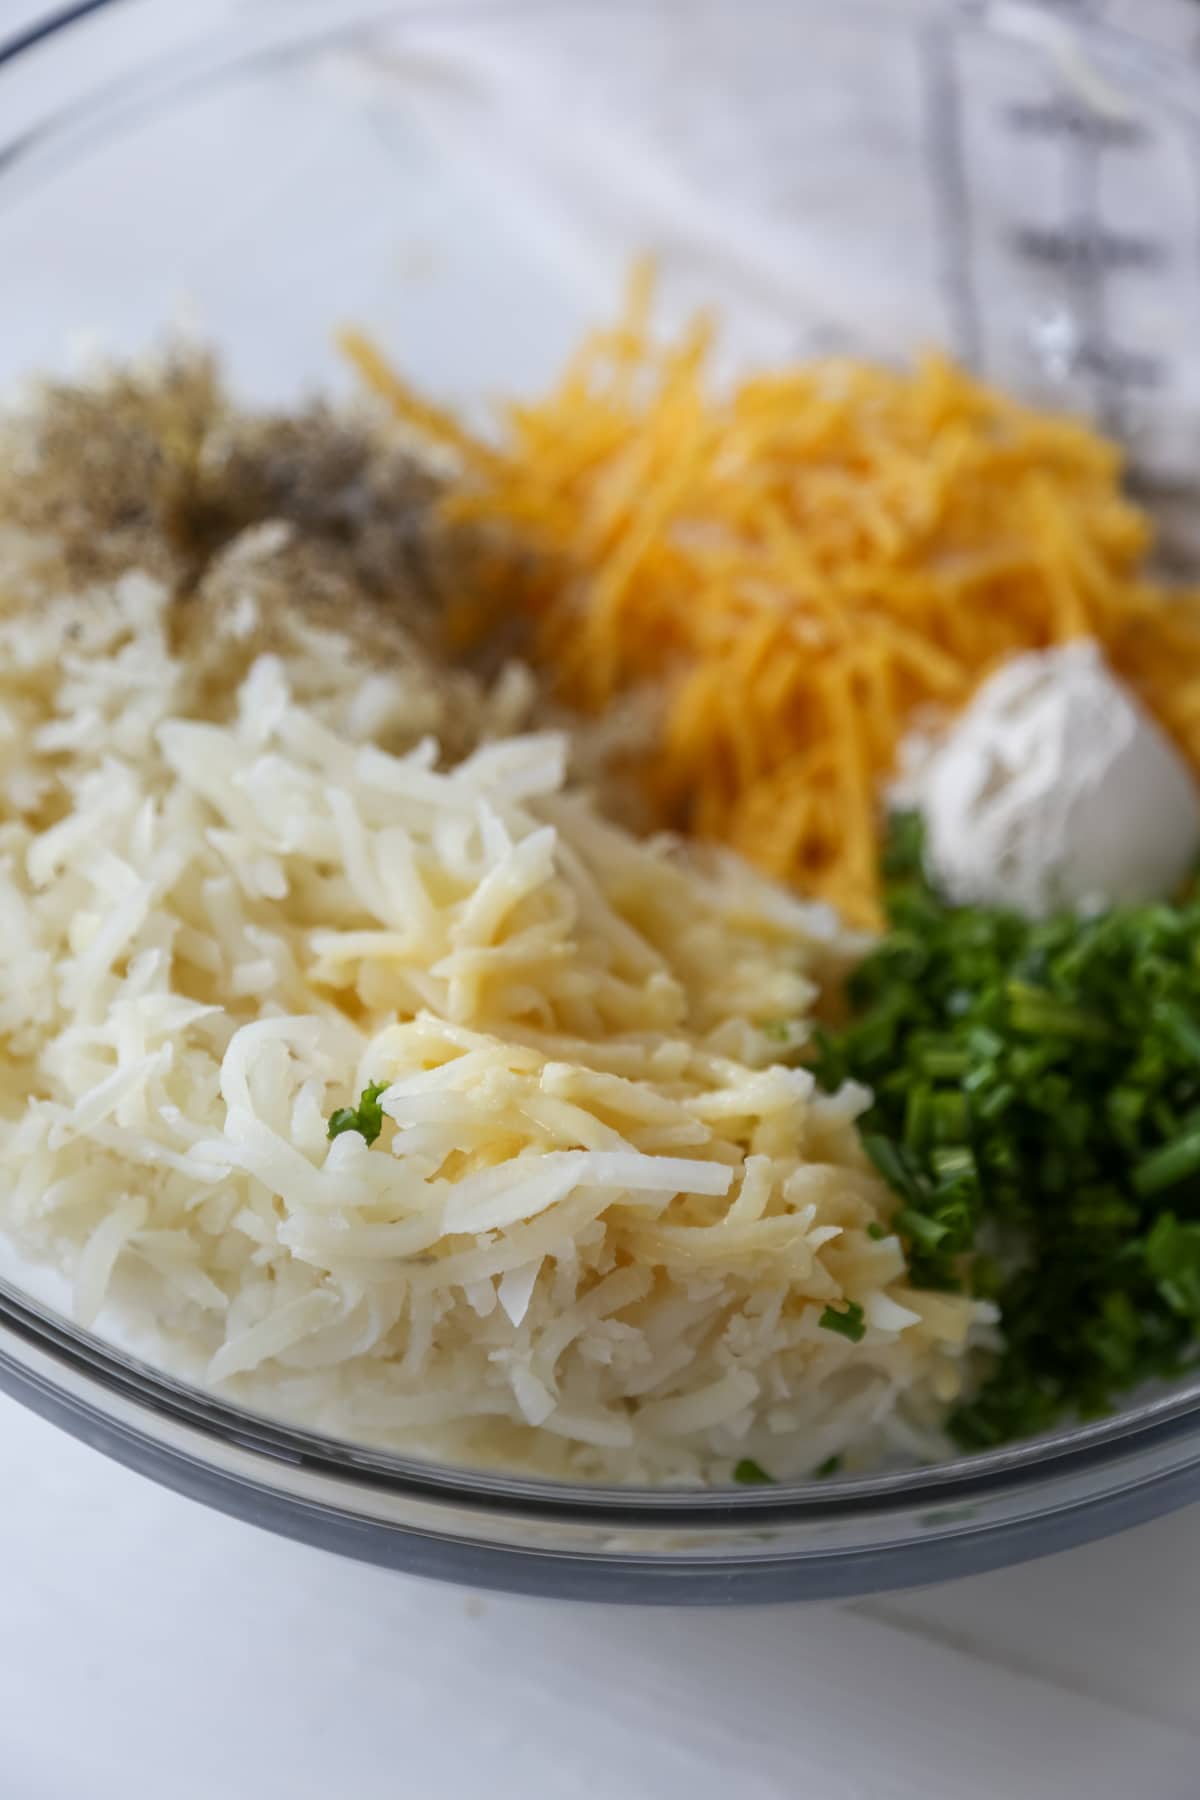 A glass bowl with shredded potato, shredded cheese, minced chives, and flour.